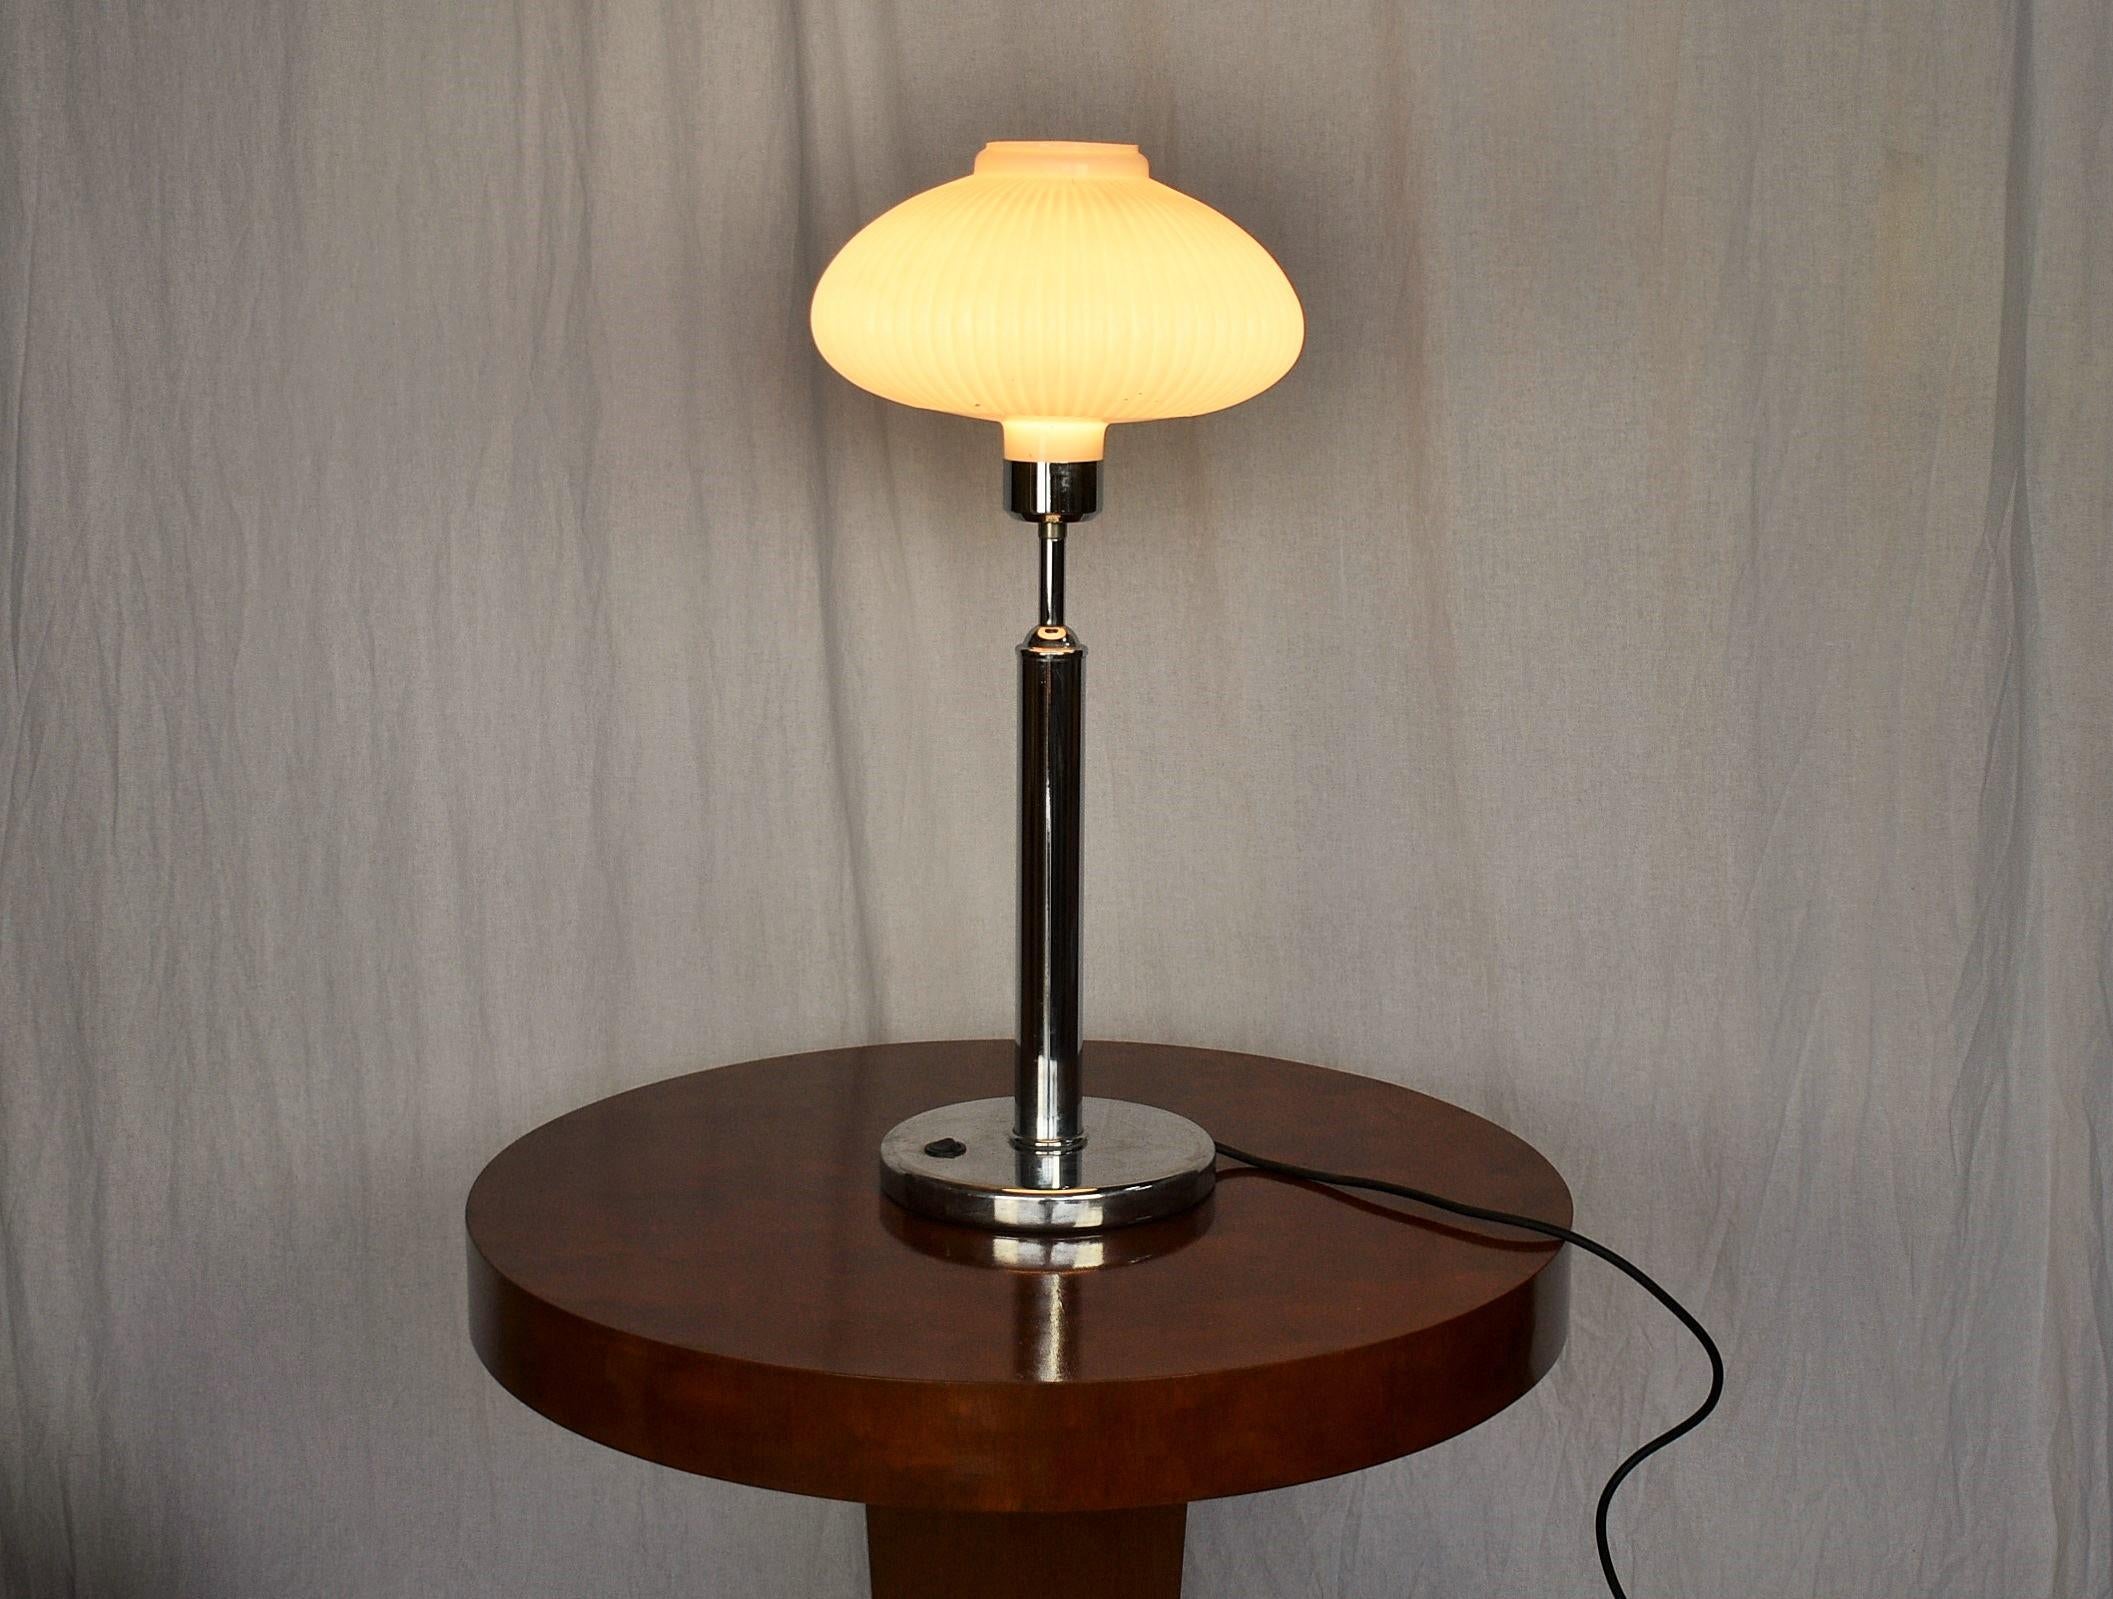 Art Deco or Functionalist Nickel-Plated Table Lamp, 1920s For Sale 1